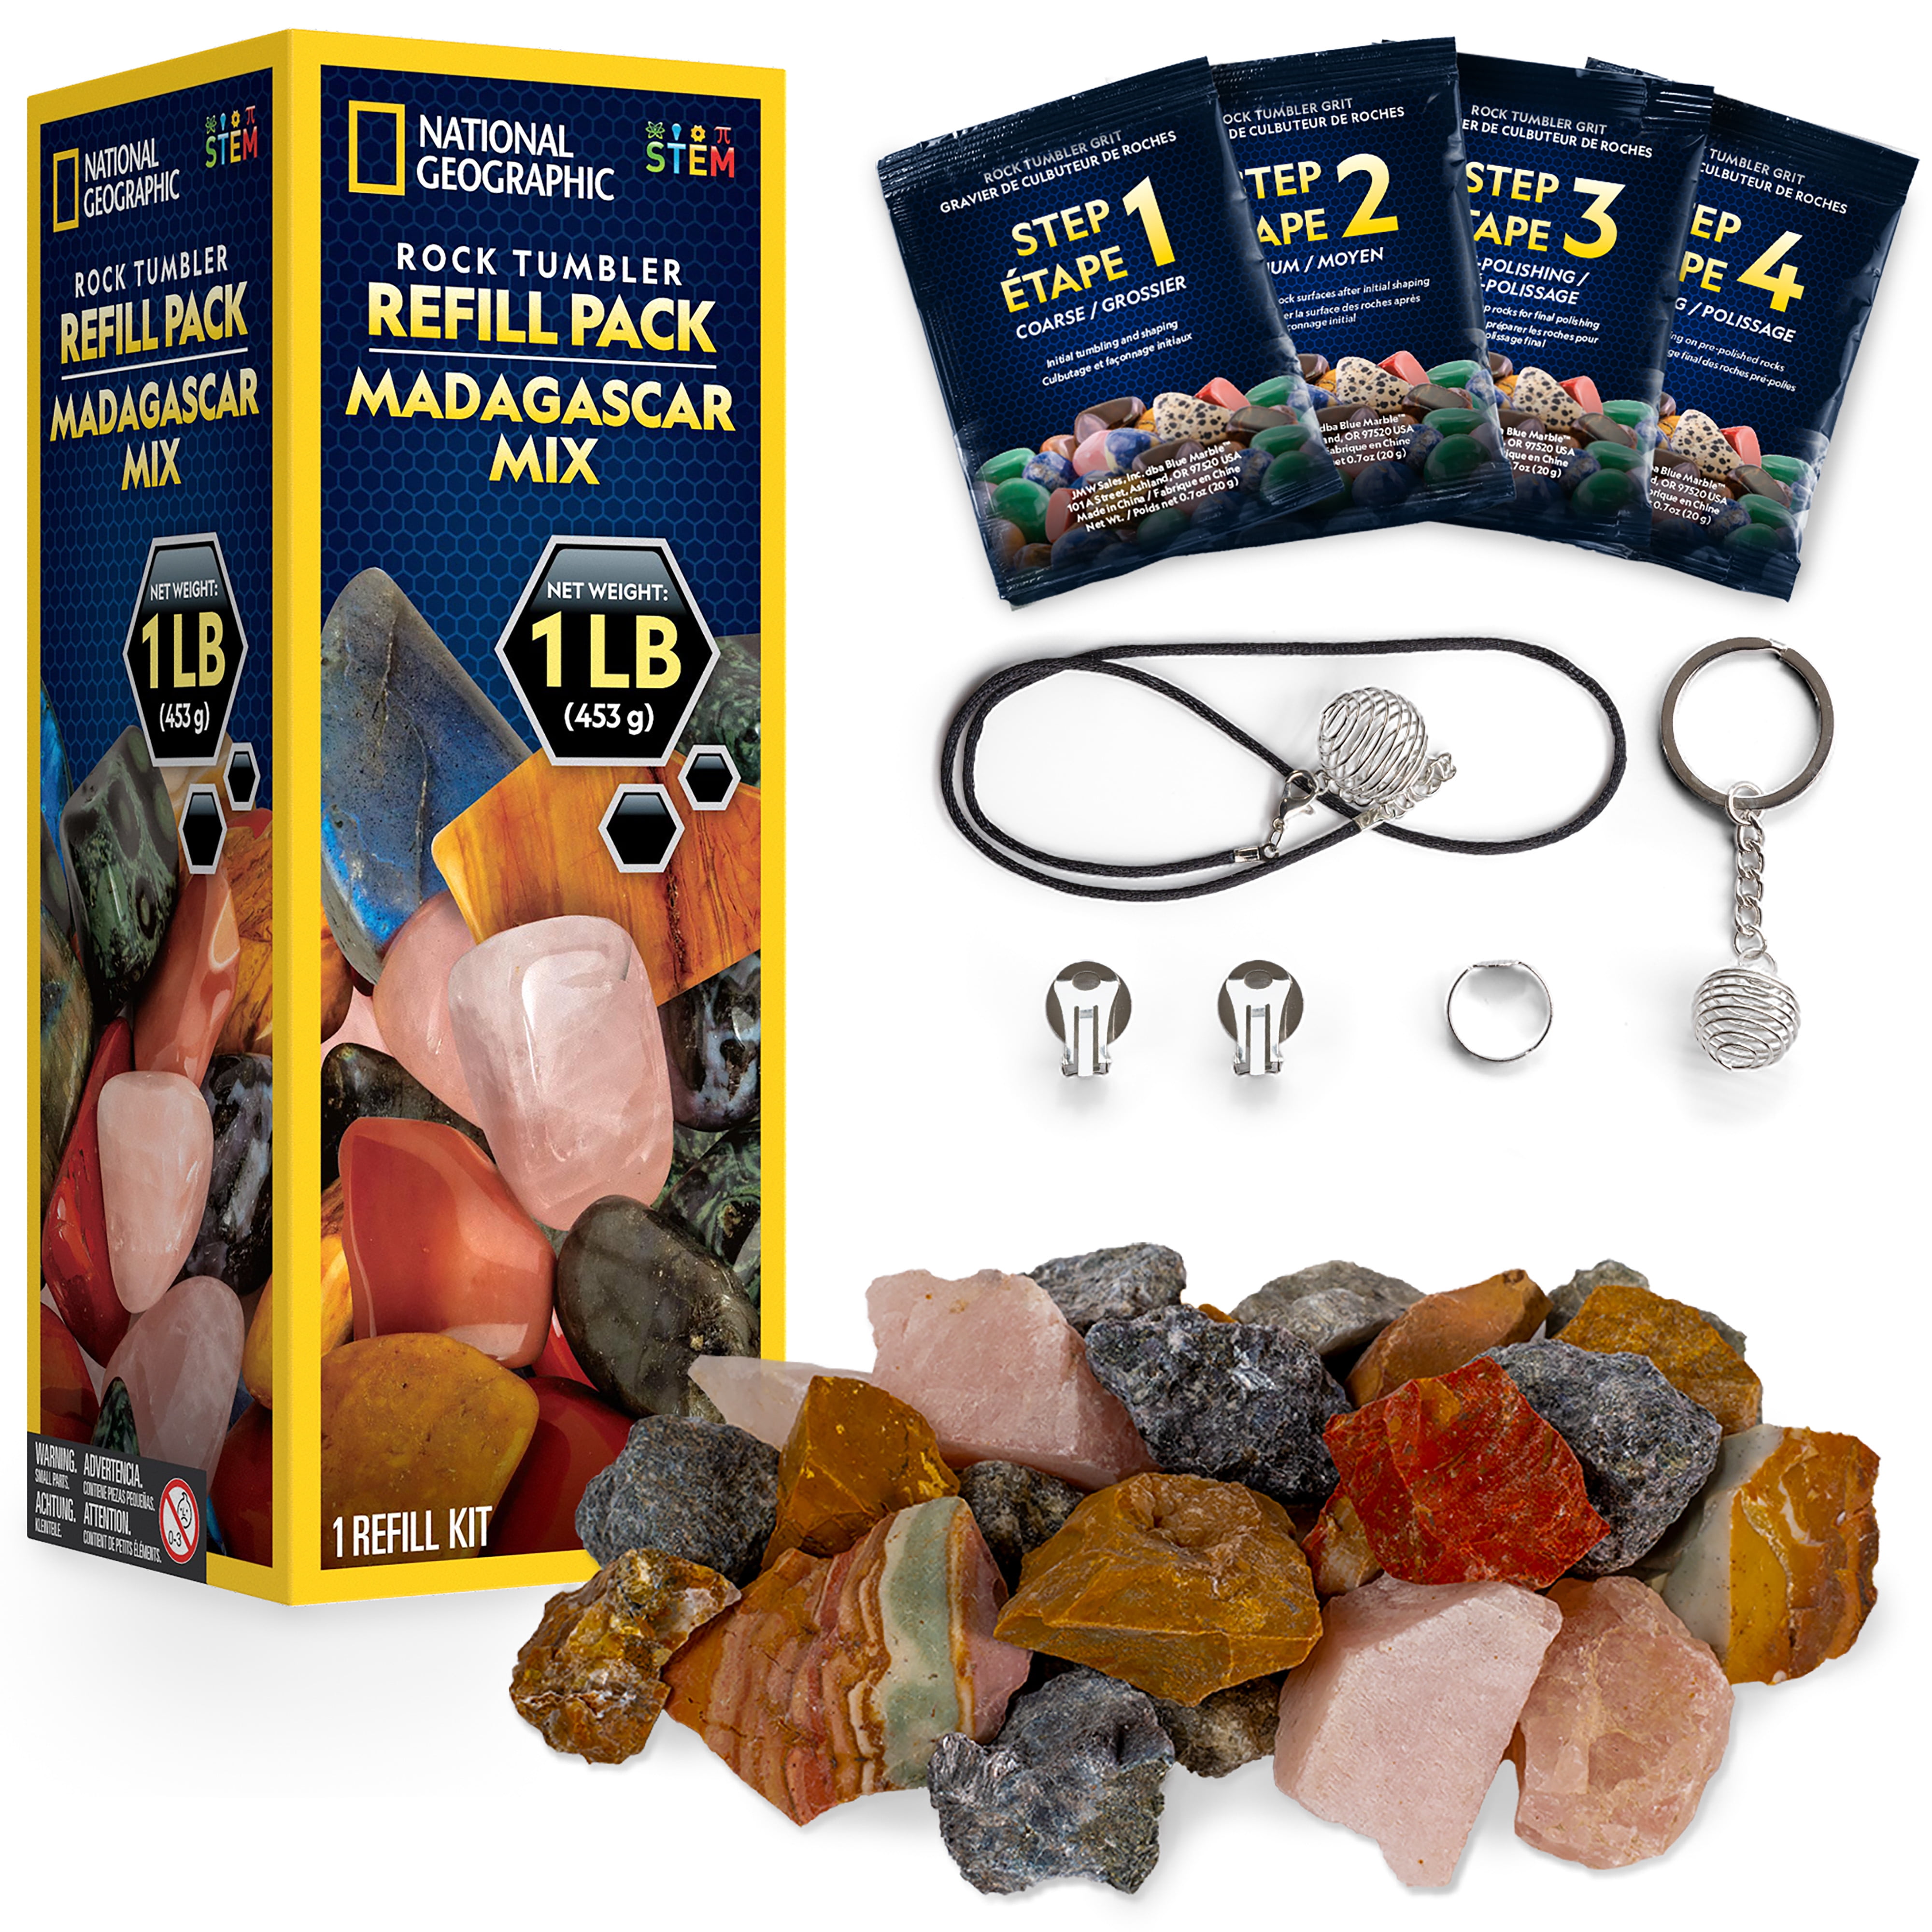 NATIONAL GEOGRAPHIC Rock Tumbler Refill Kit - 1 Lb. Madagascar Rough Rocks  for Tumbling, Rock Tumbler Grit and Jewelry Accessories, For All Ages 